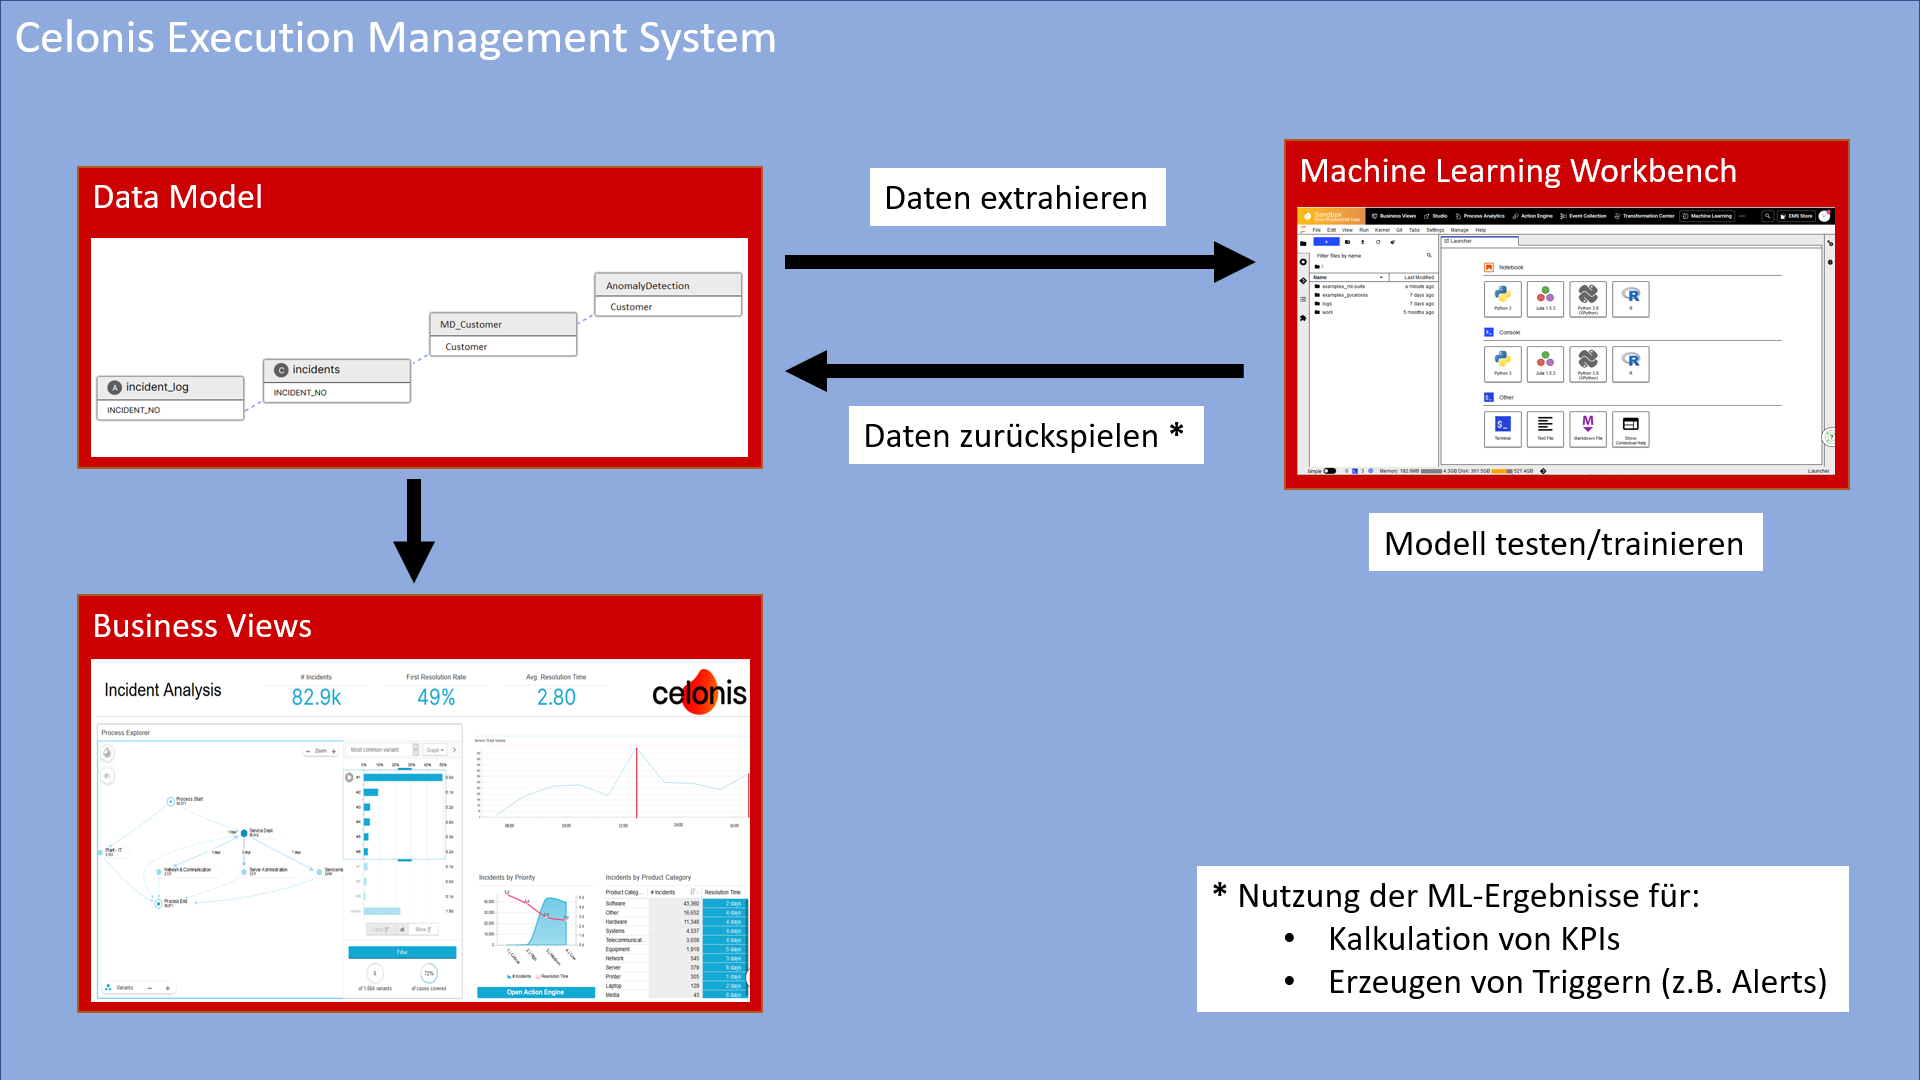 Darstellung des Celonis Execution Management Systems